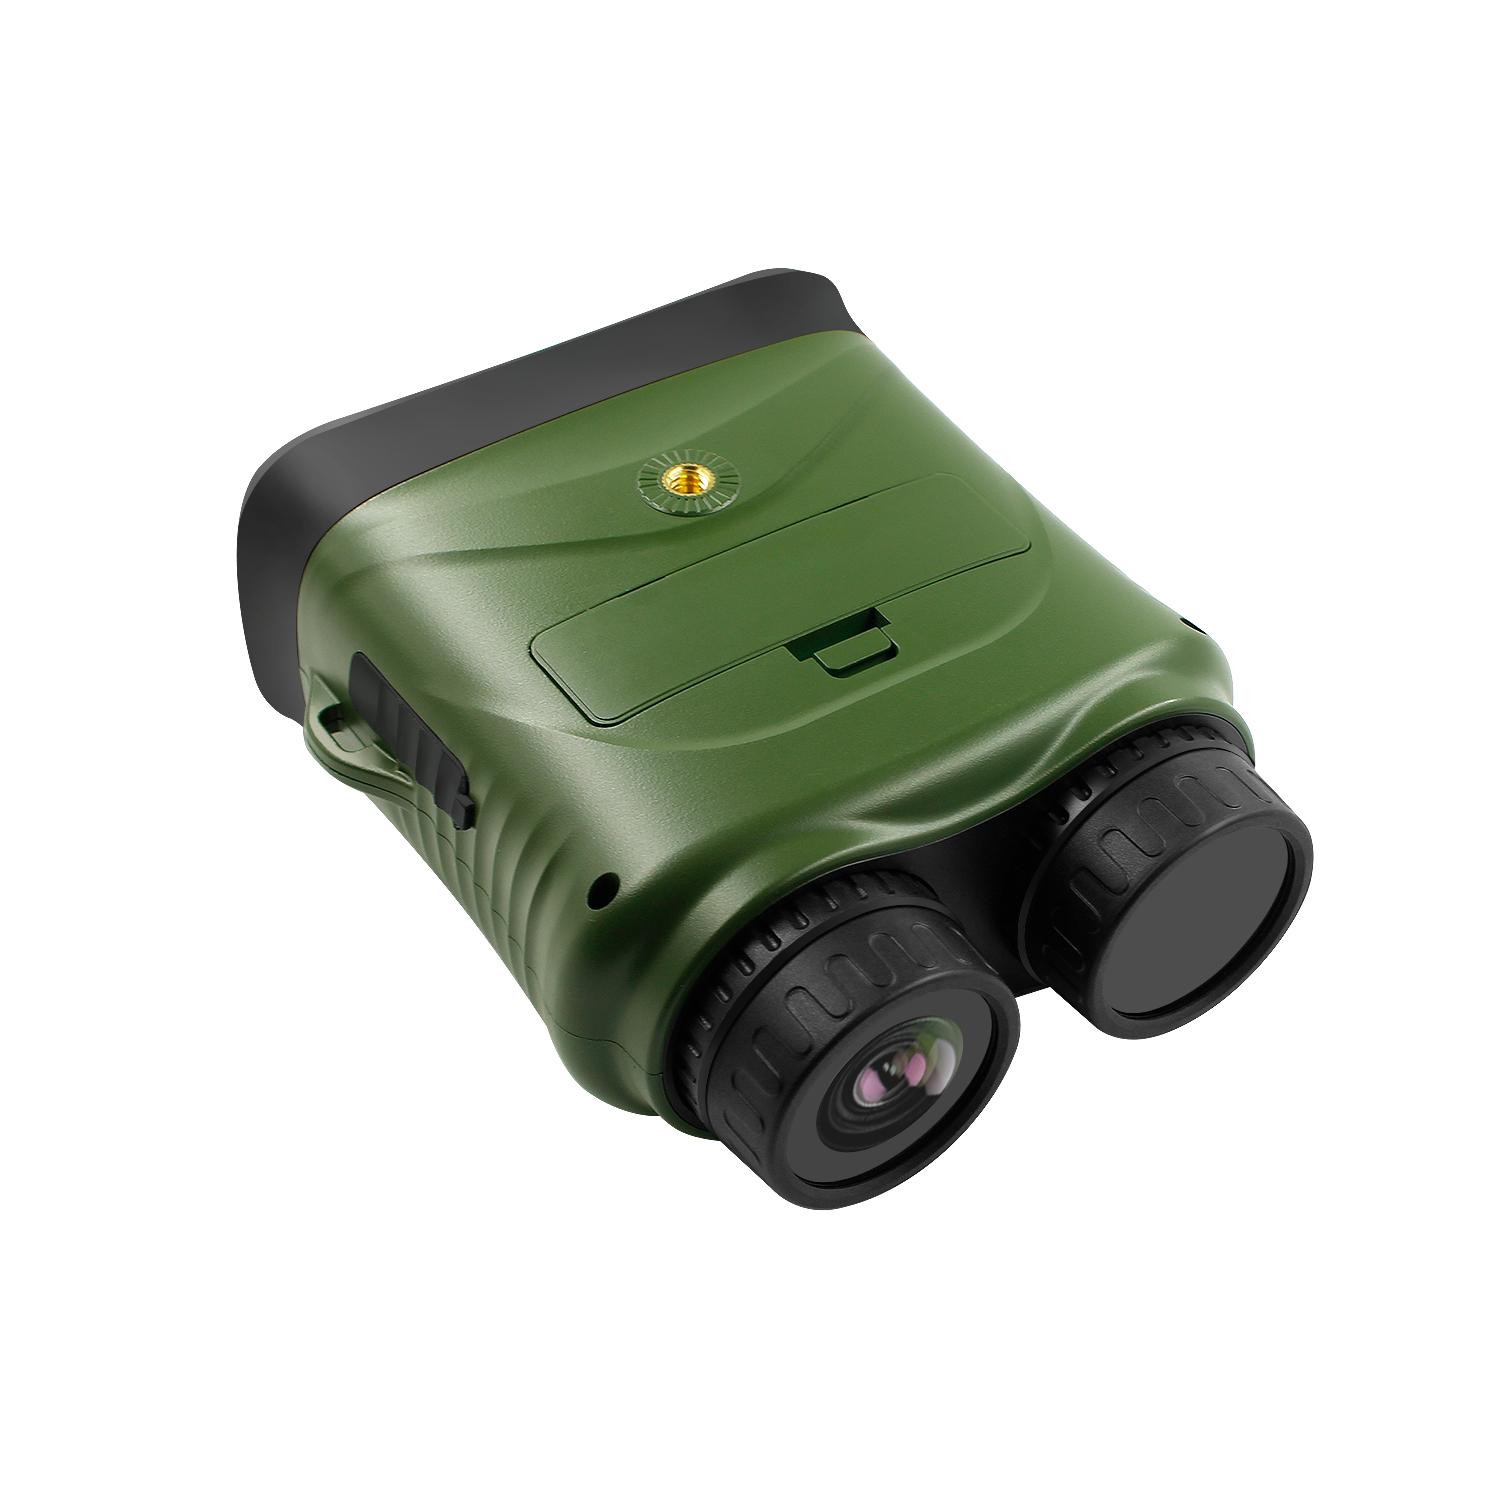 2.5K UHD 3.0 inch LCD Digital Infrared Binoculars Night Vision with 8X Zooming Photo Video Recording Camera DT39